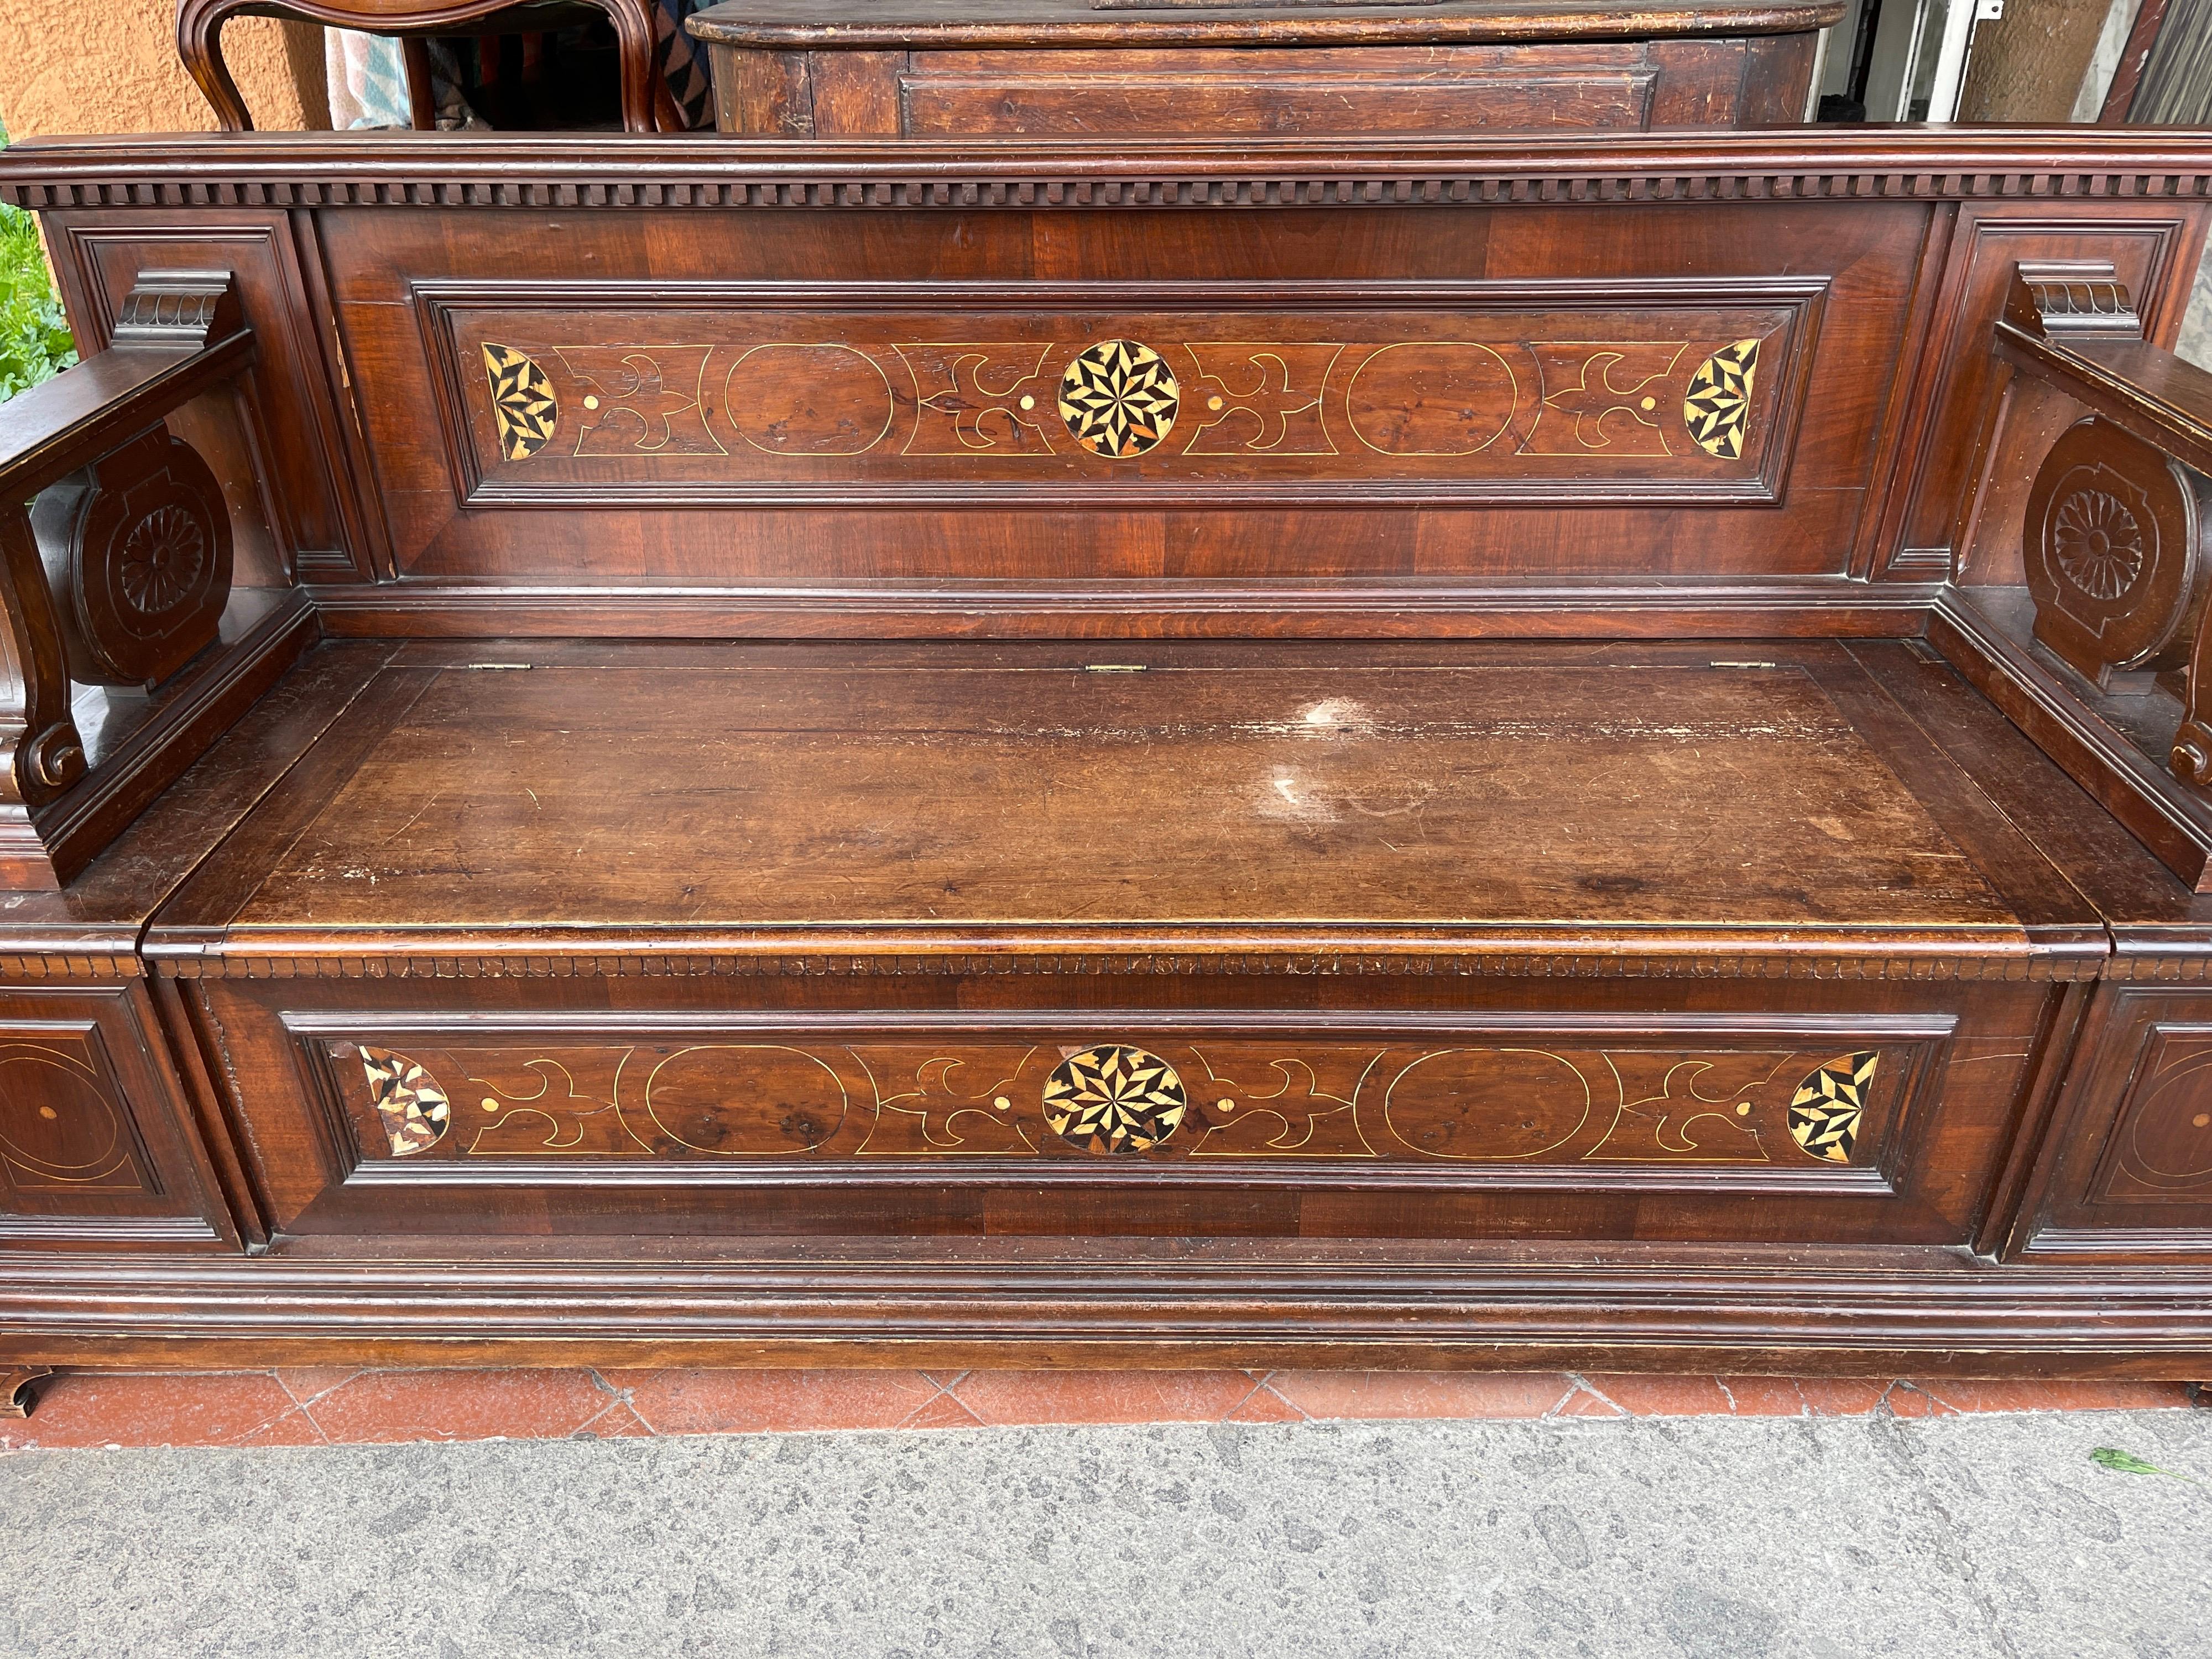 Fantastic chest with back, of Italian origin. Central Italy, Tuscany region. In walnut wood with bone inlays and ebonized wood. Forms that bring the object to the Renaissance motifs. Beautiful carving and inlay type windrose at the center of the